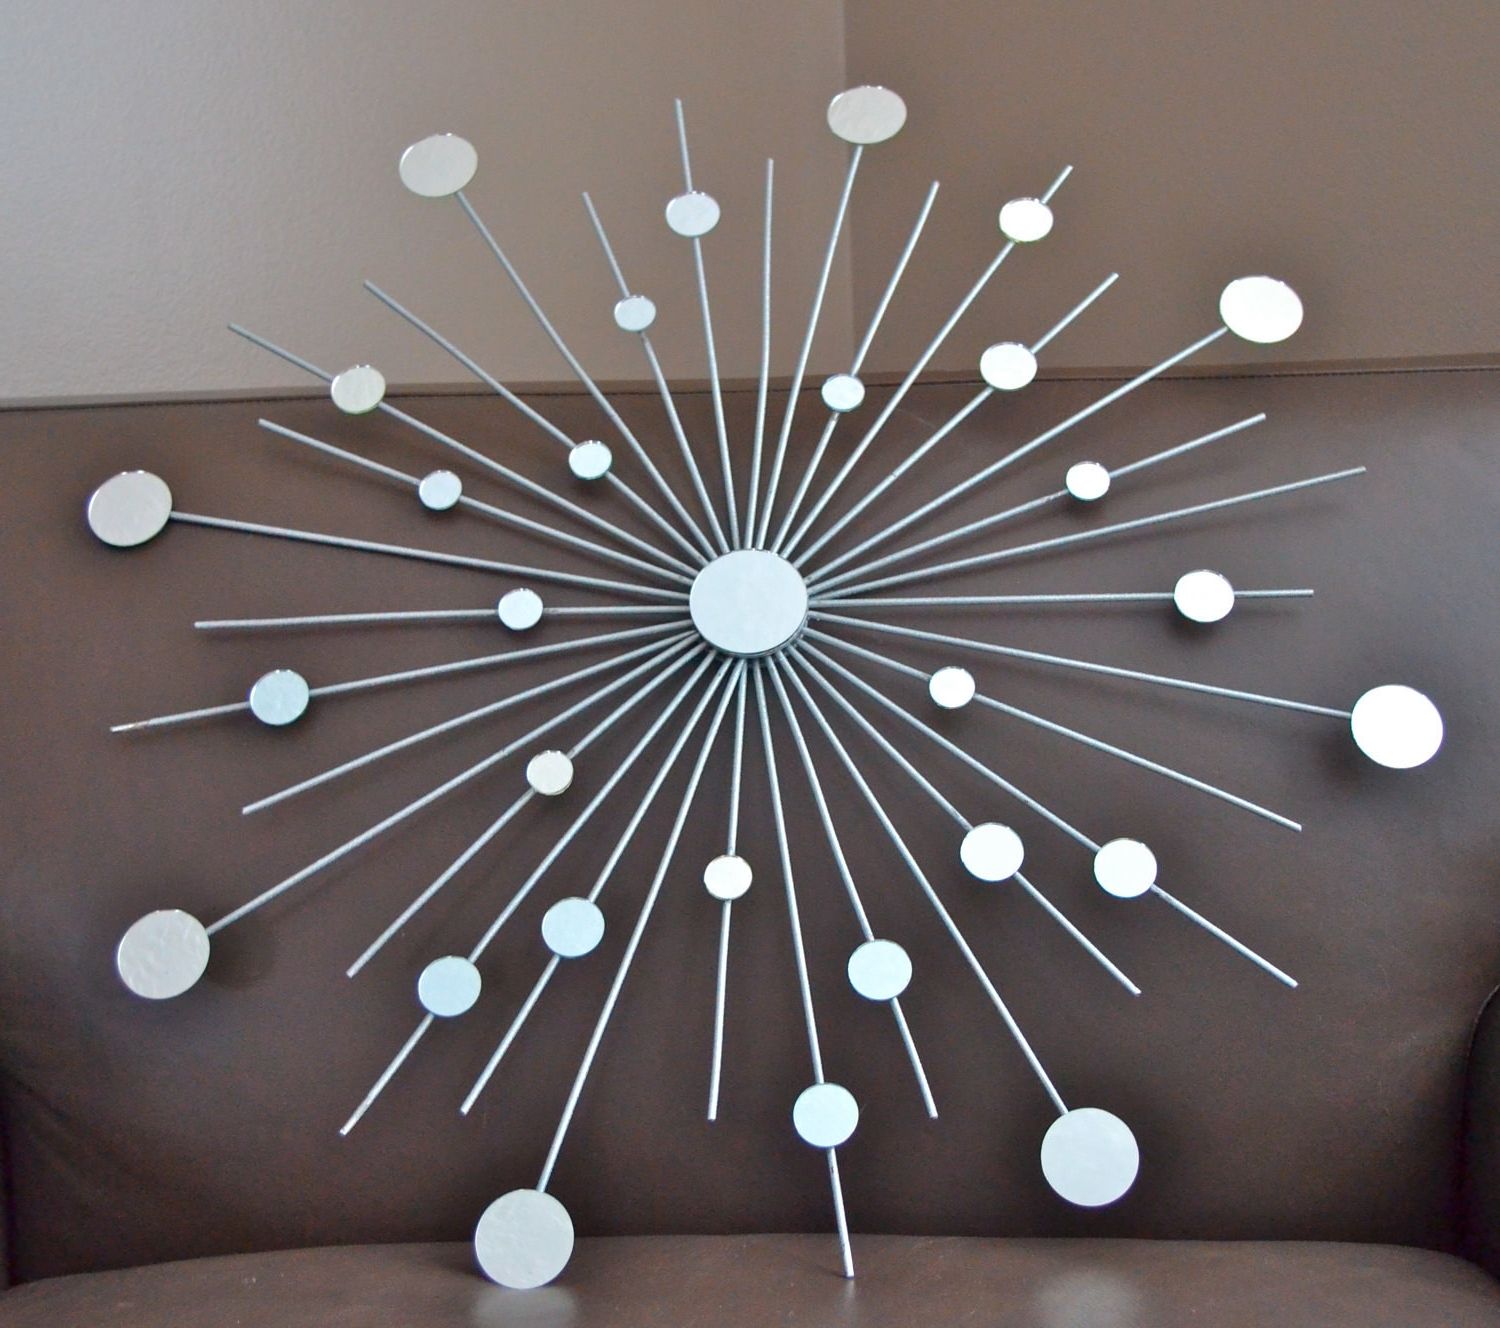 Widely Used Metal Starburst Wall Decor Awesome Triple Starburst Metal Wall Art With Starburst Wall Art (View 12 of 15)